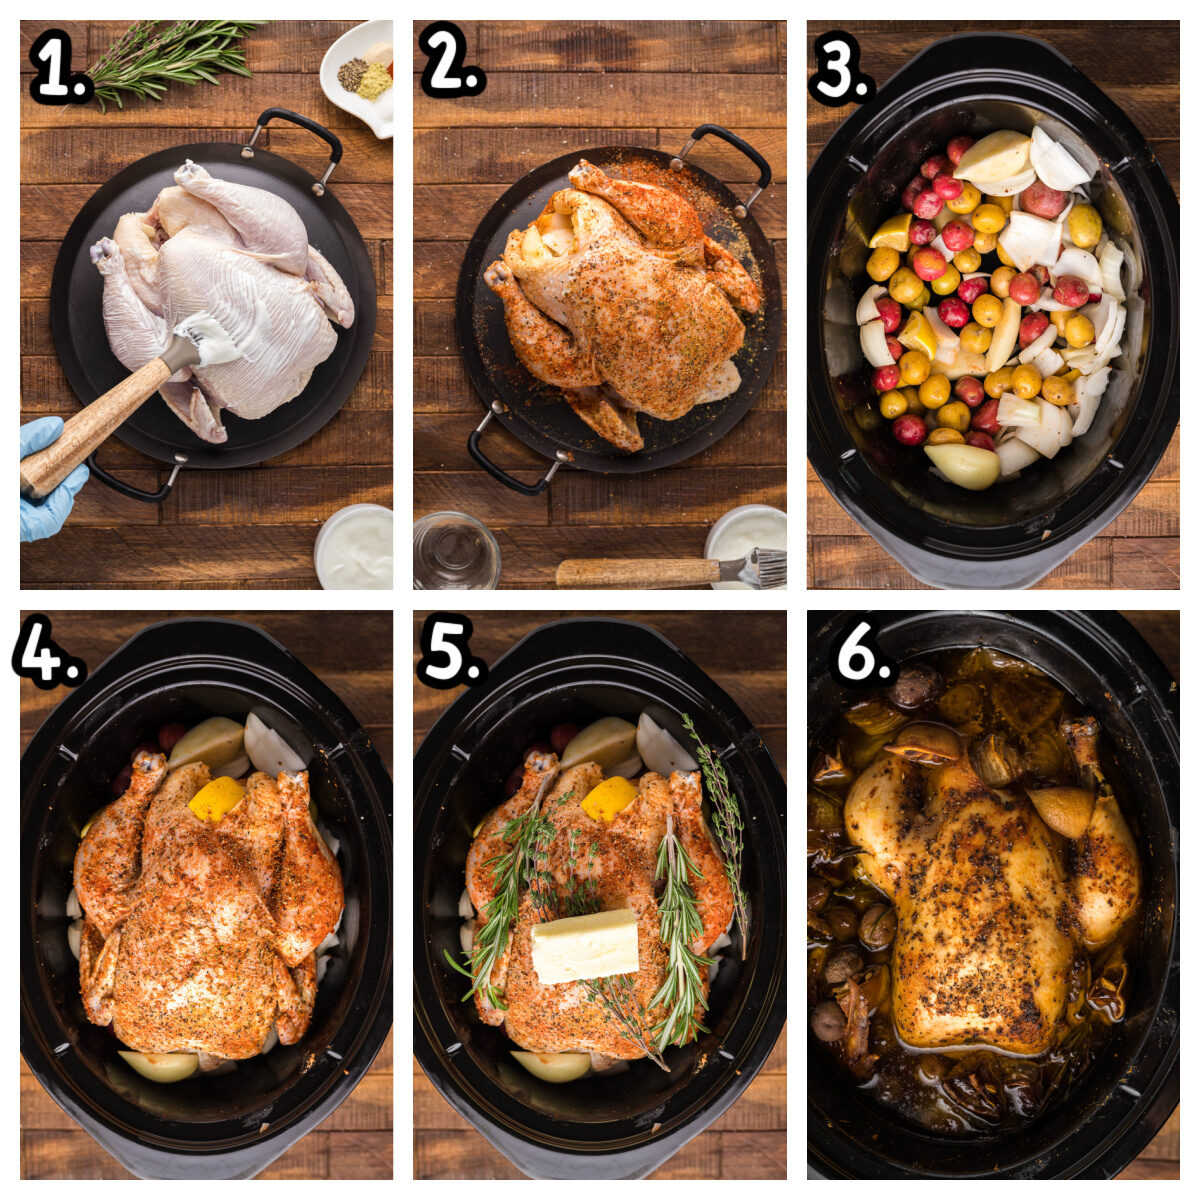 6 images about how to to seasoning and put vegetables, beer and chicken in crockpot.